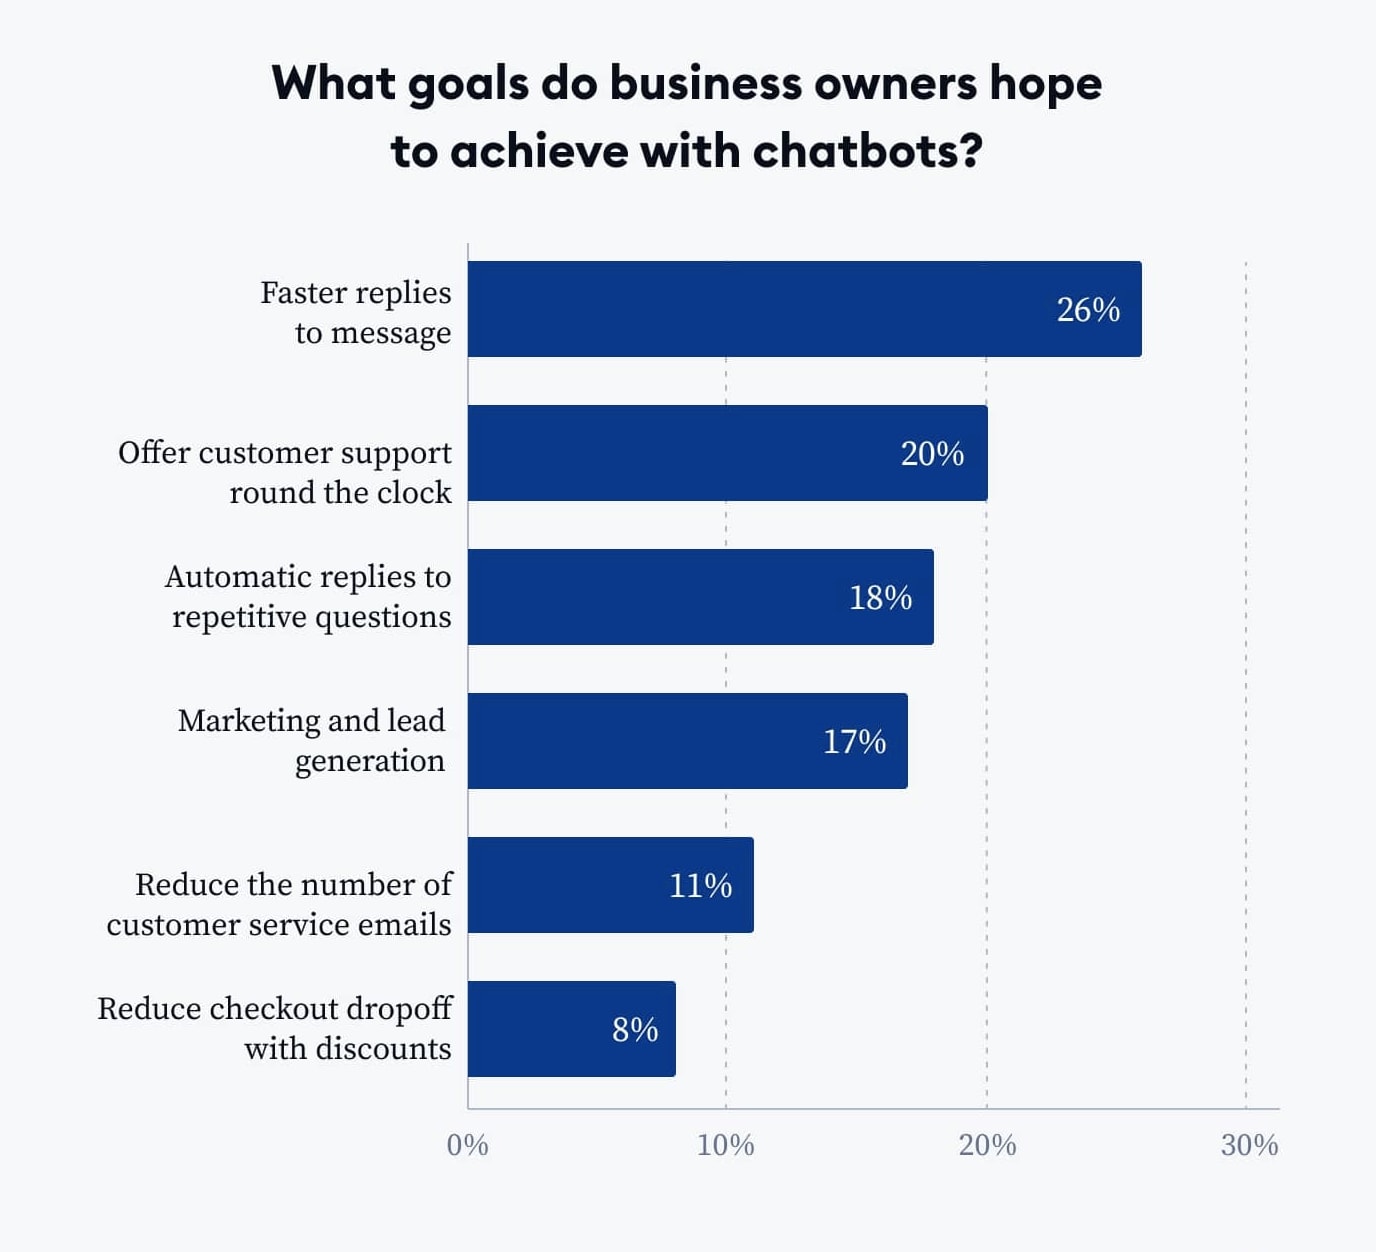 Chart displaying various goals that business owners hope to achieve with chatbots.